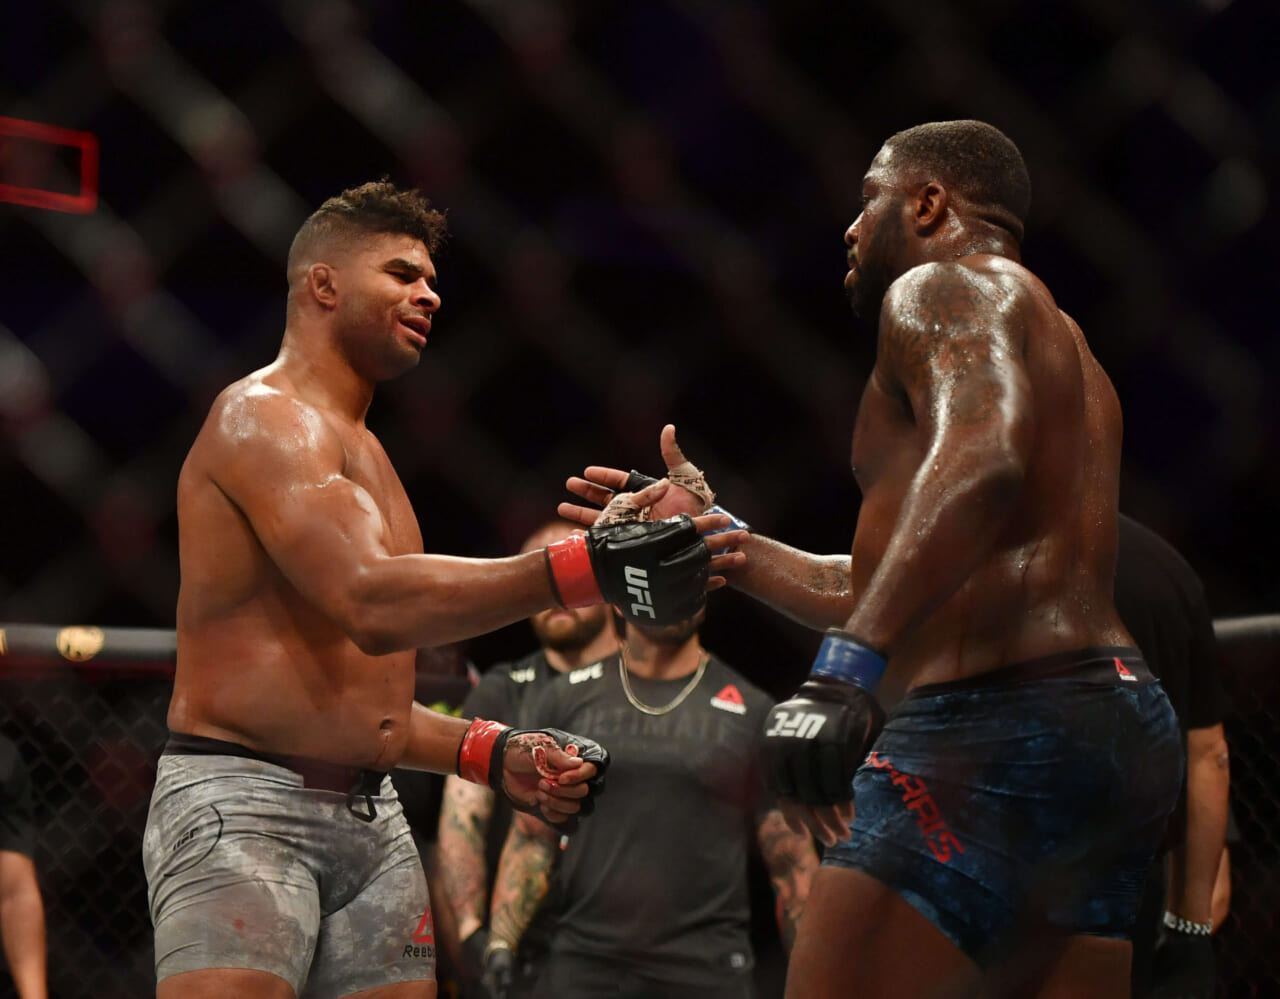 What’s next for Alistair Overeem after UFC Vegas 18 loss?